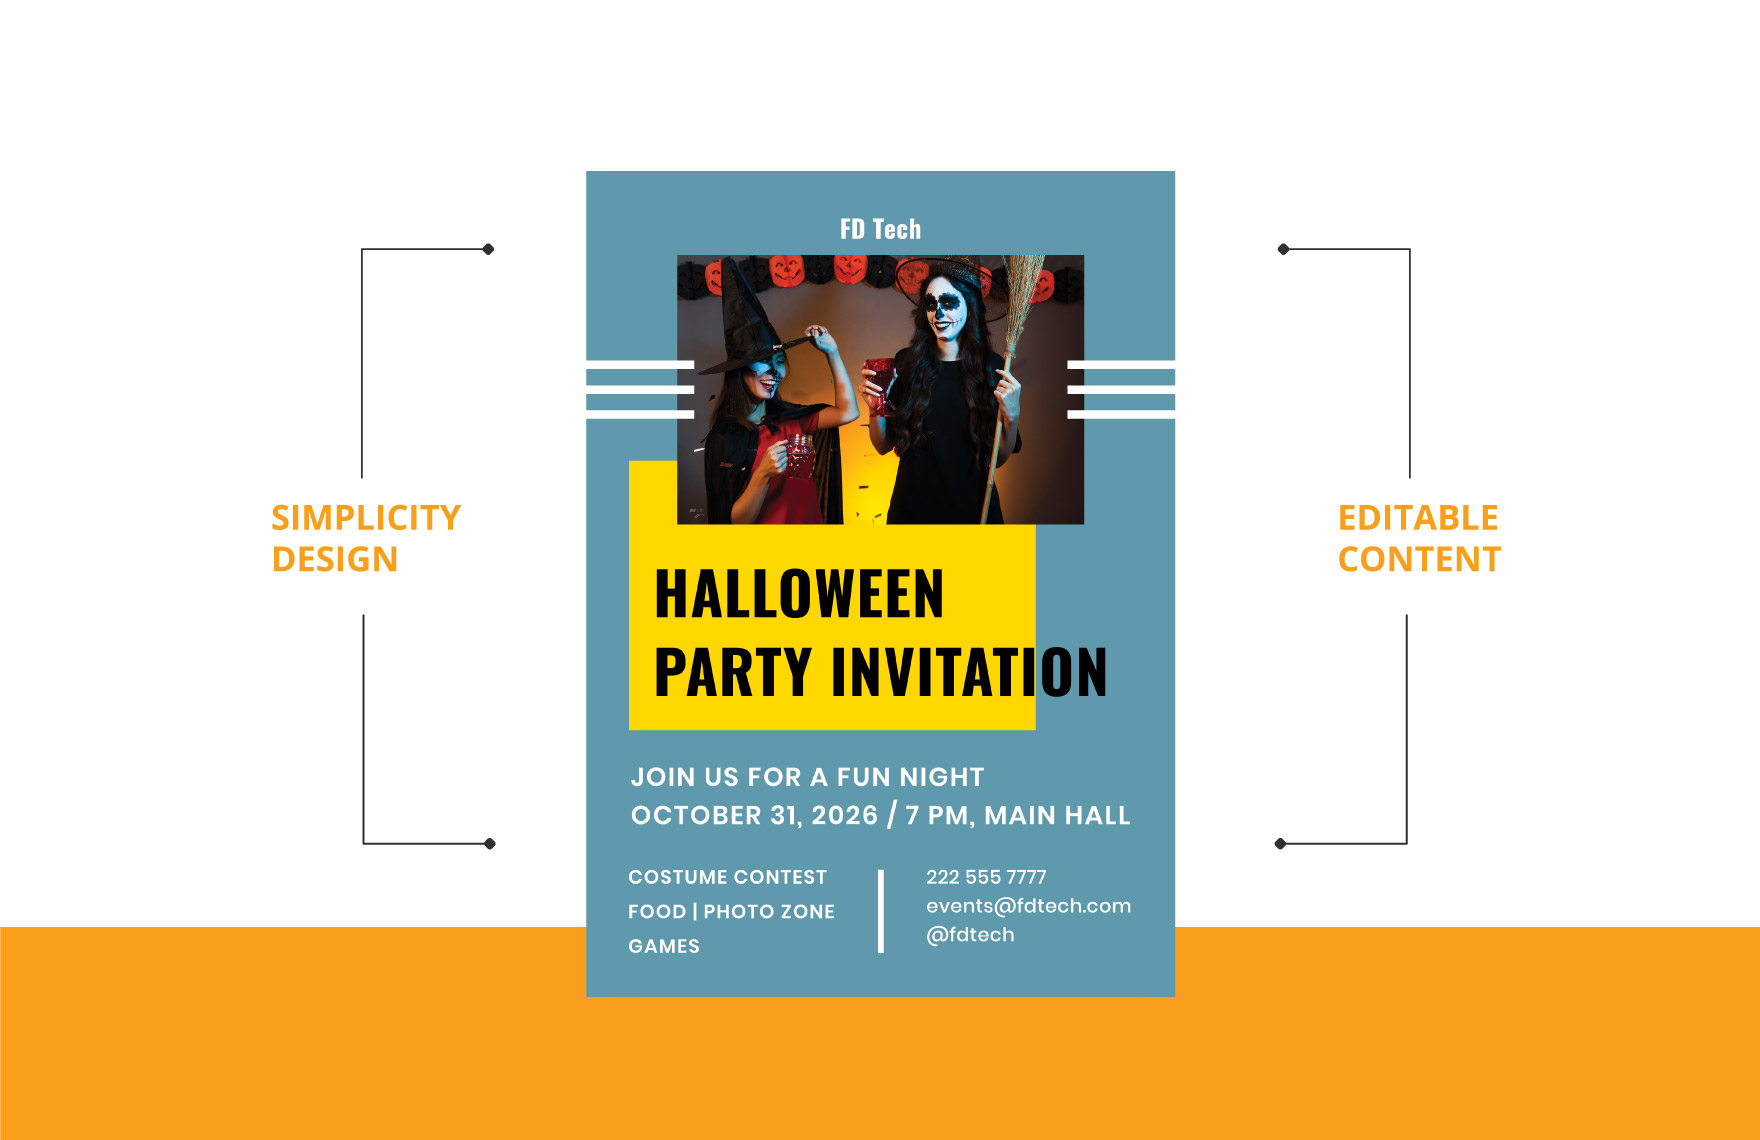 Halloween Office Party Flyer Template